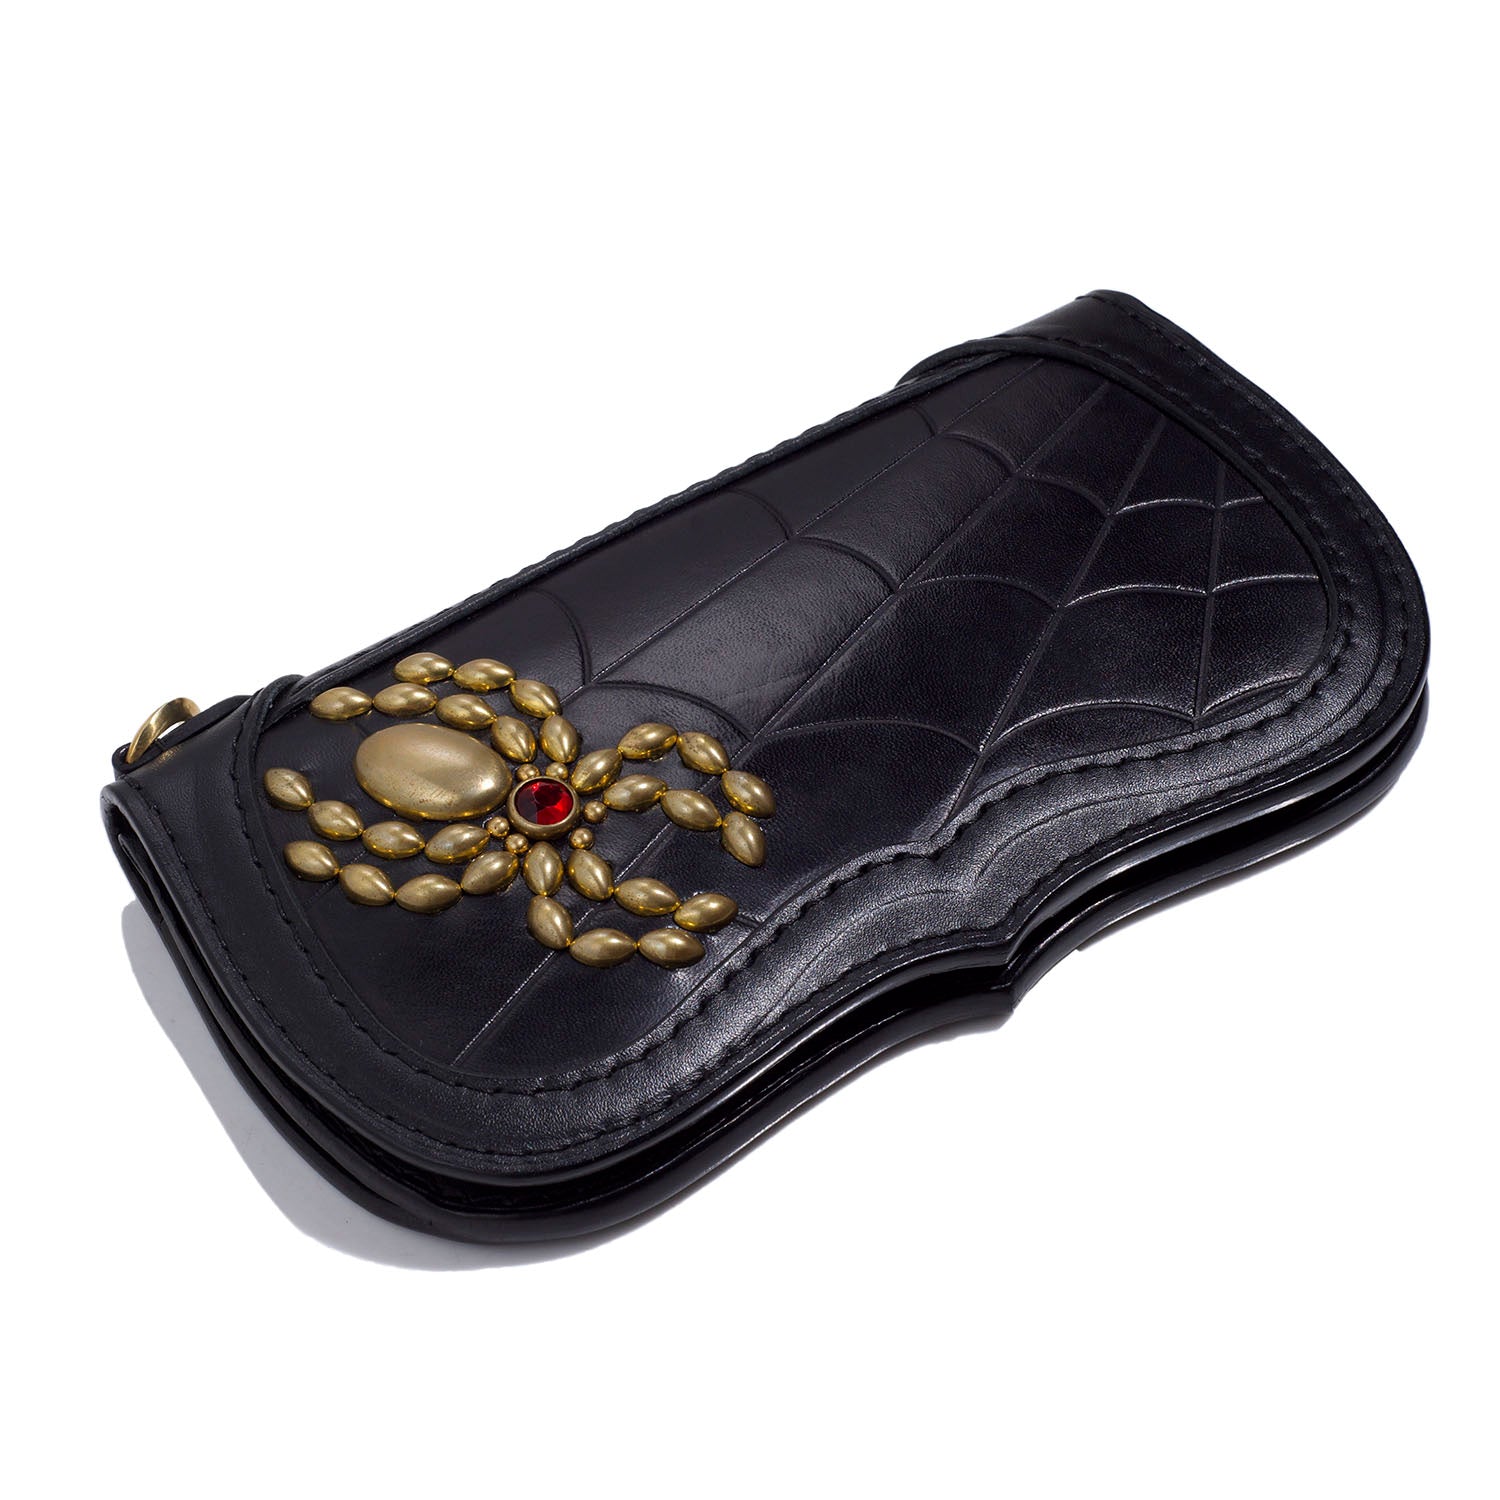 MAY CLUB LIMITED SPIDER HANDMADE WALLET - COWHIDE - May club